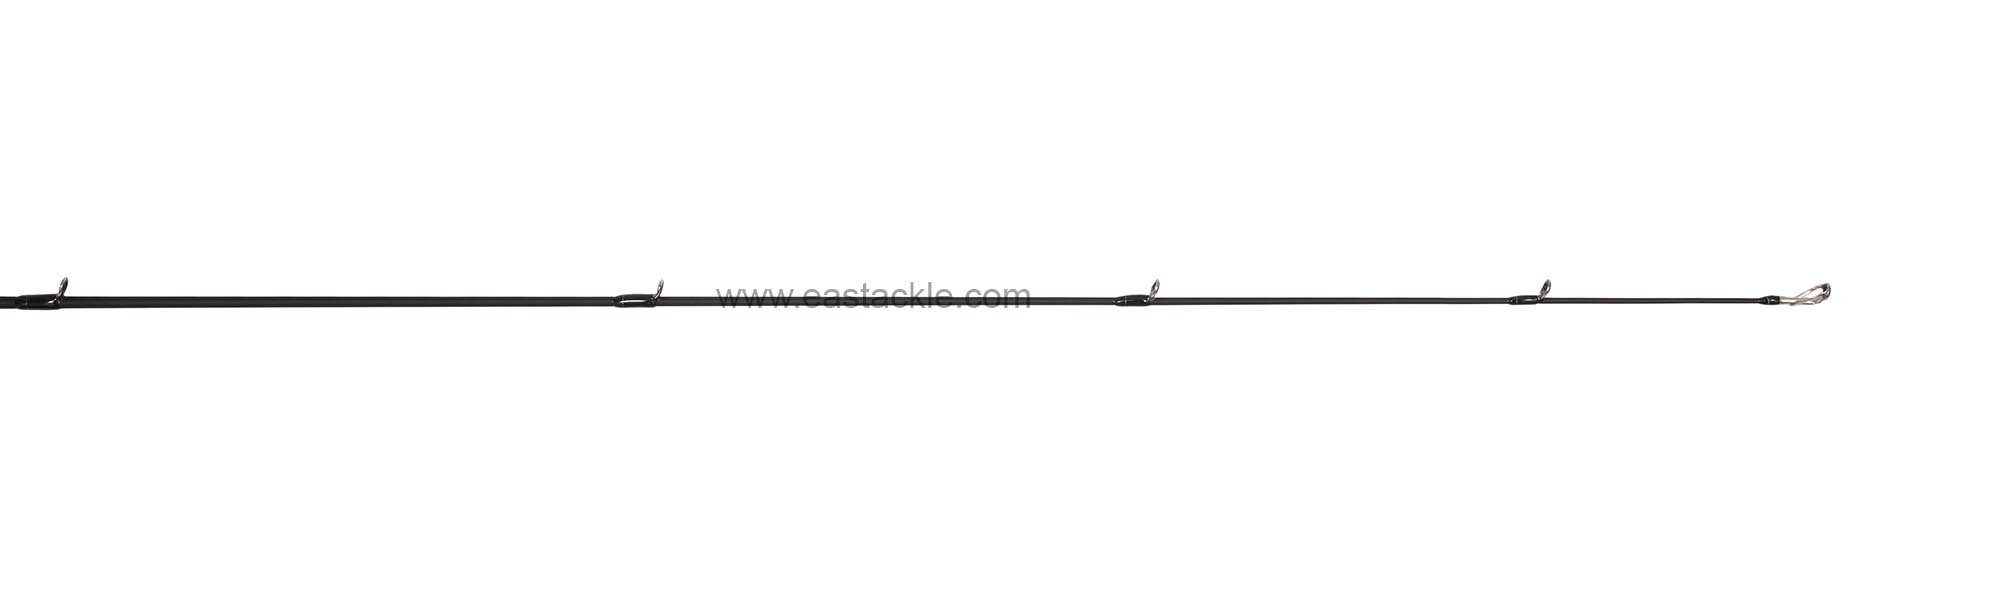 Rapala - Koivu - KVC662MH - Bait Casting Rod - Tip Section (Side View) | Eastackle